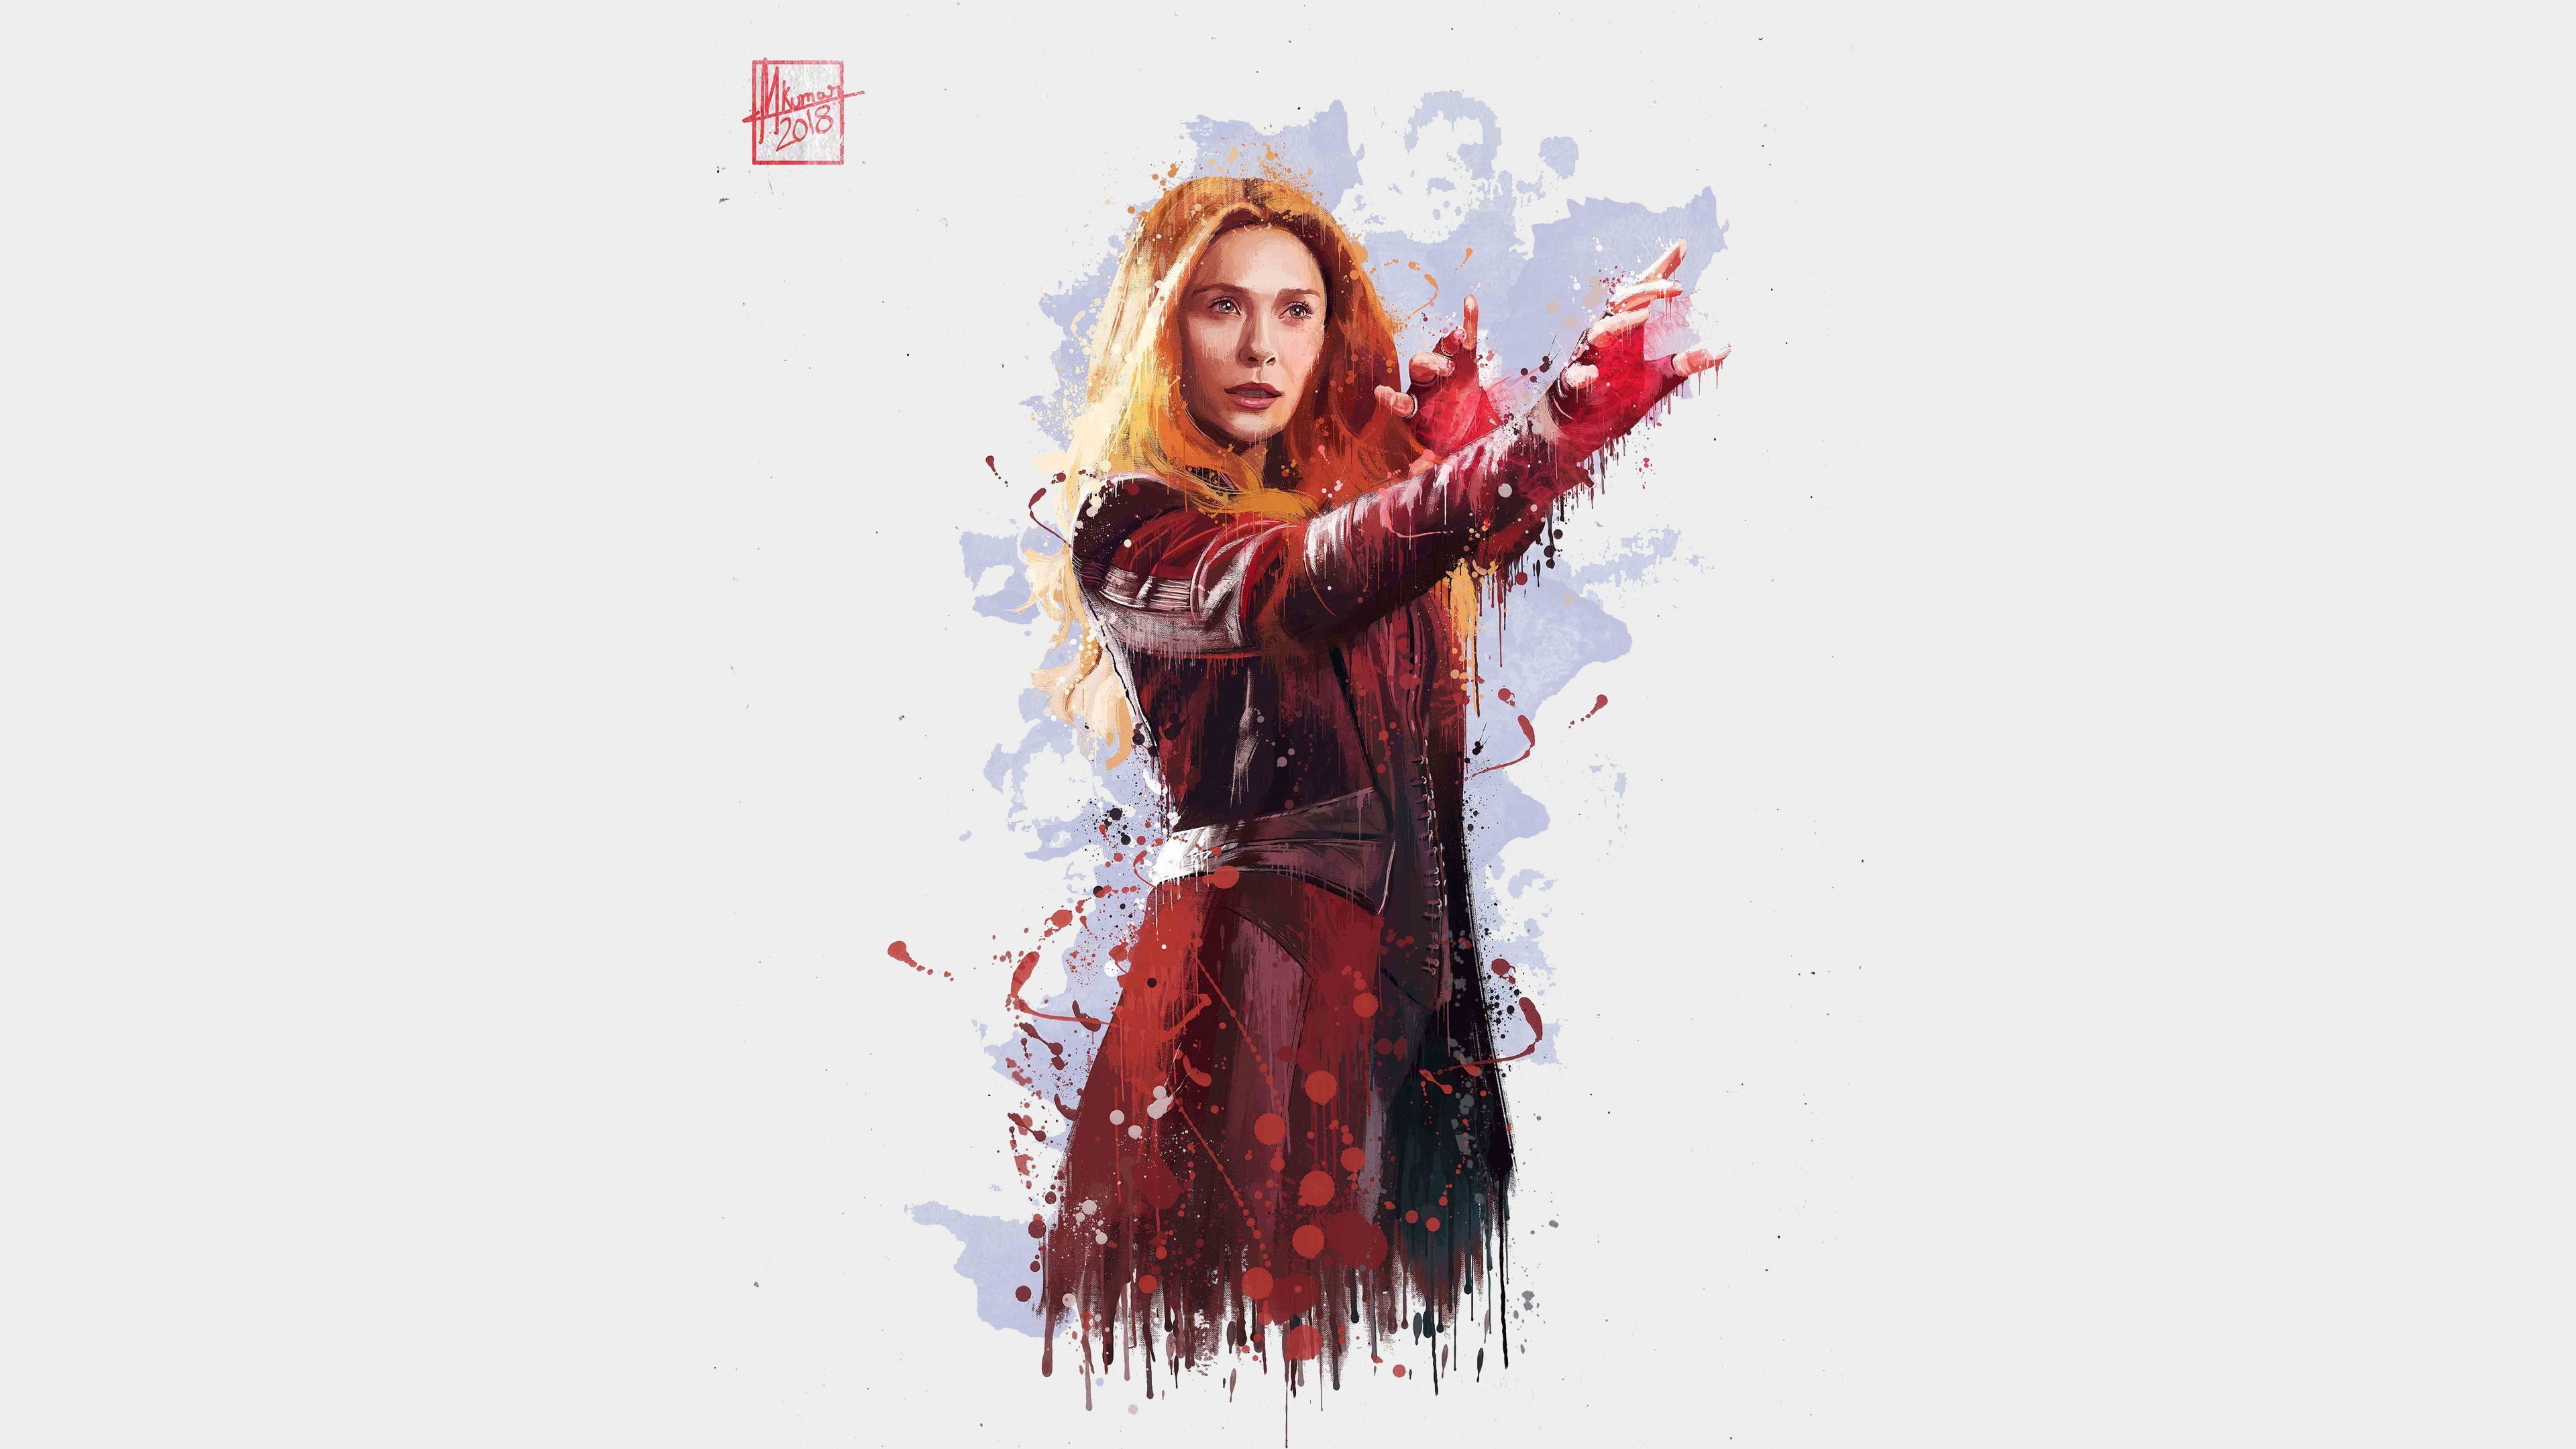 scarlet witch infinity war. Scarlet Witch In Avengers Infinity War 2018 4k Artwork, HD. Scarlet witch avengers, Witch wallpaper, Scarlet witch